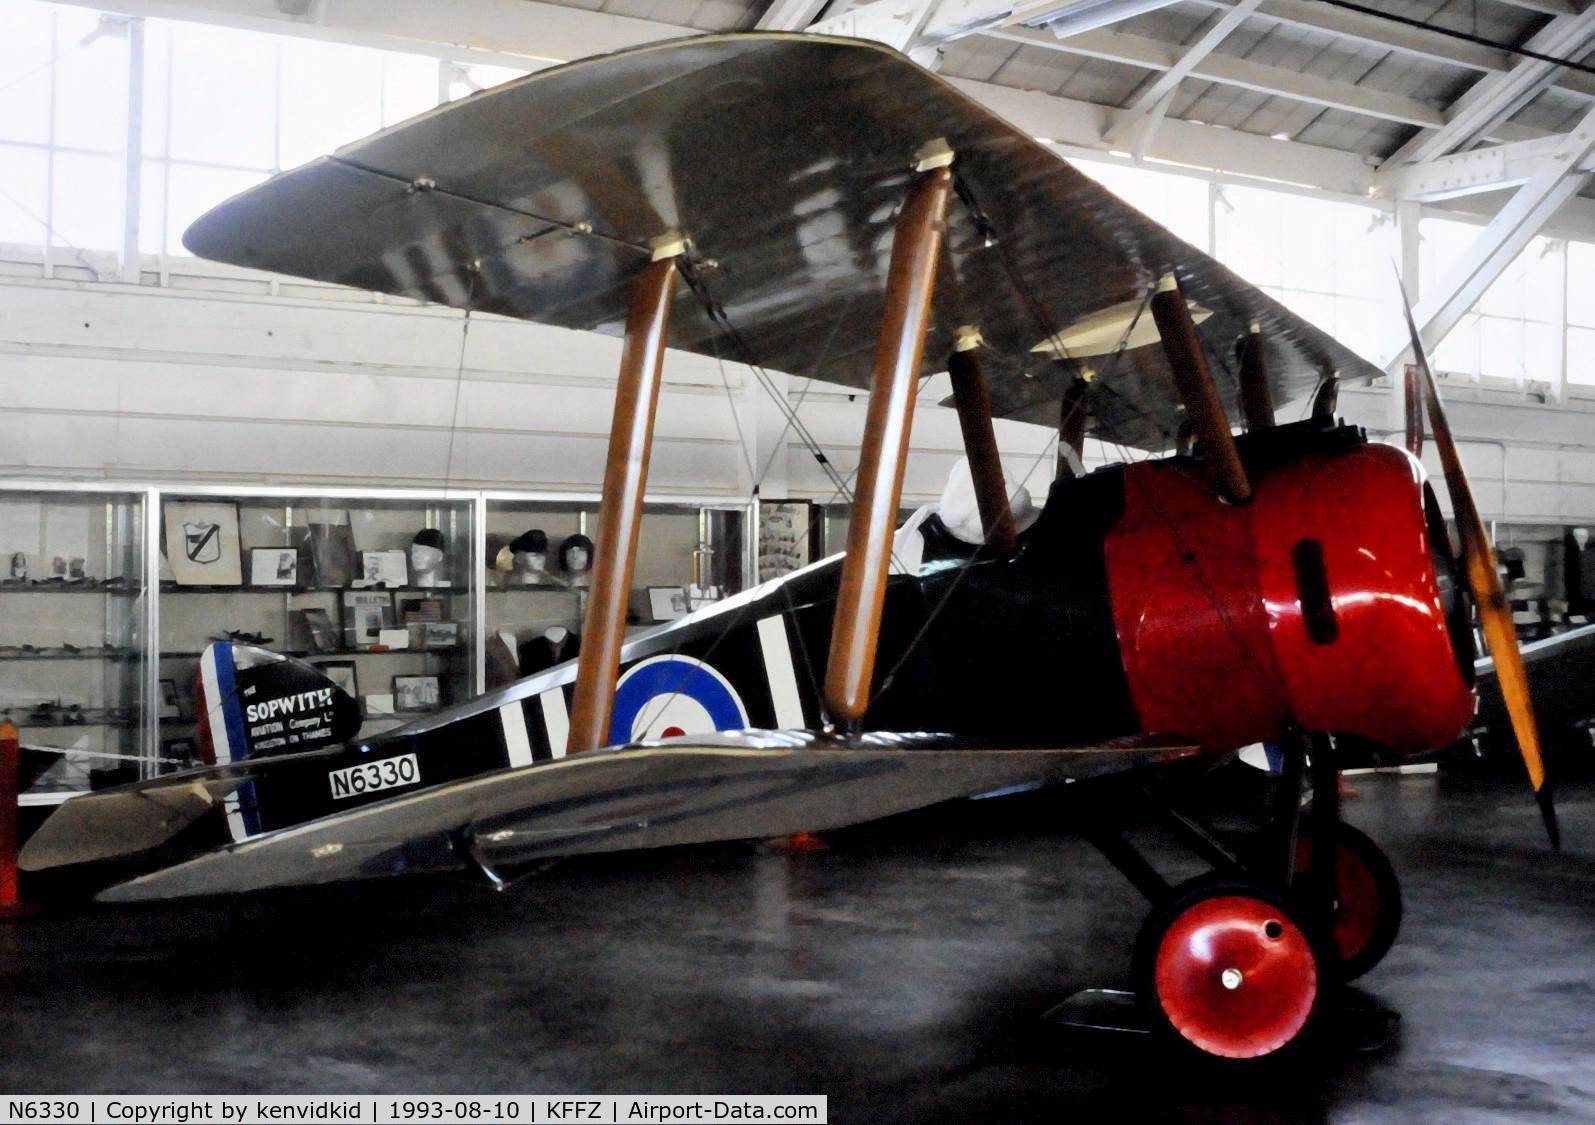 N6330, 1981 Sopwith F.1 Camel Replica C/N AA-105, At the Champlin Fighter Museum.